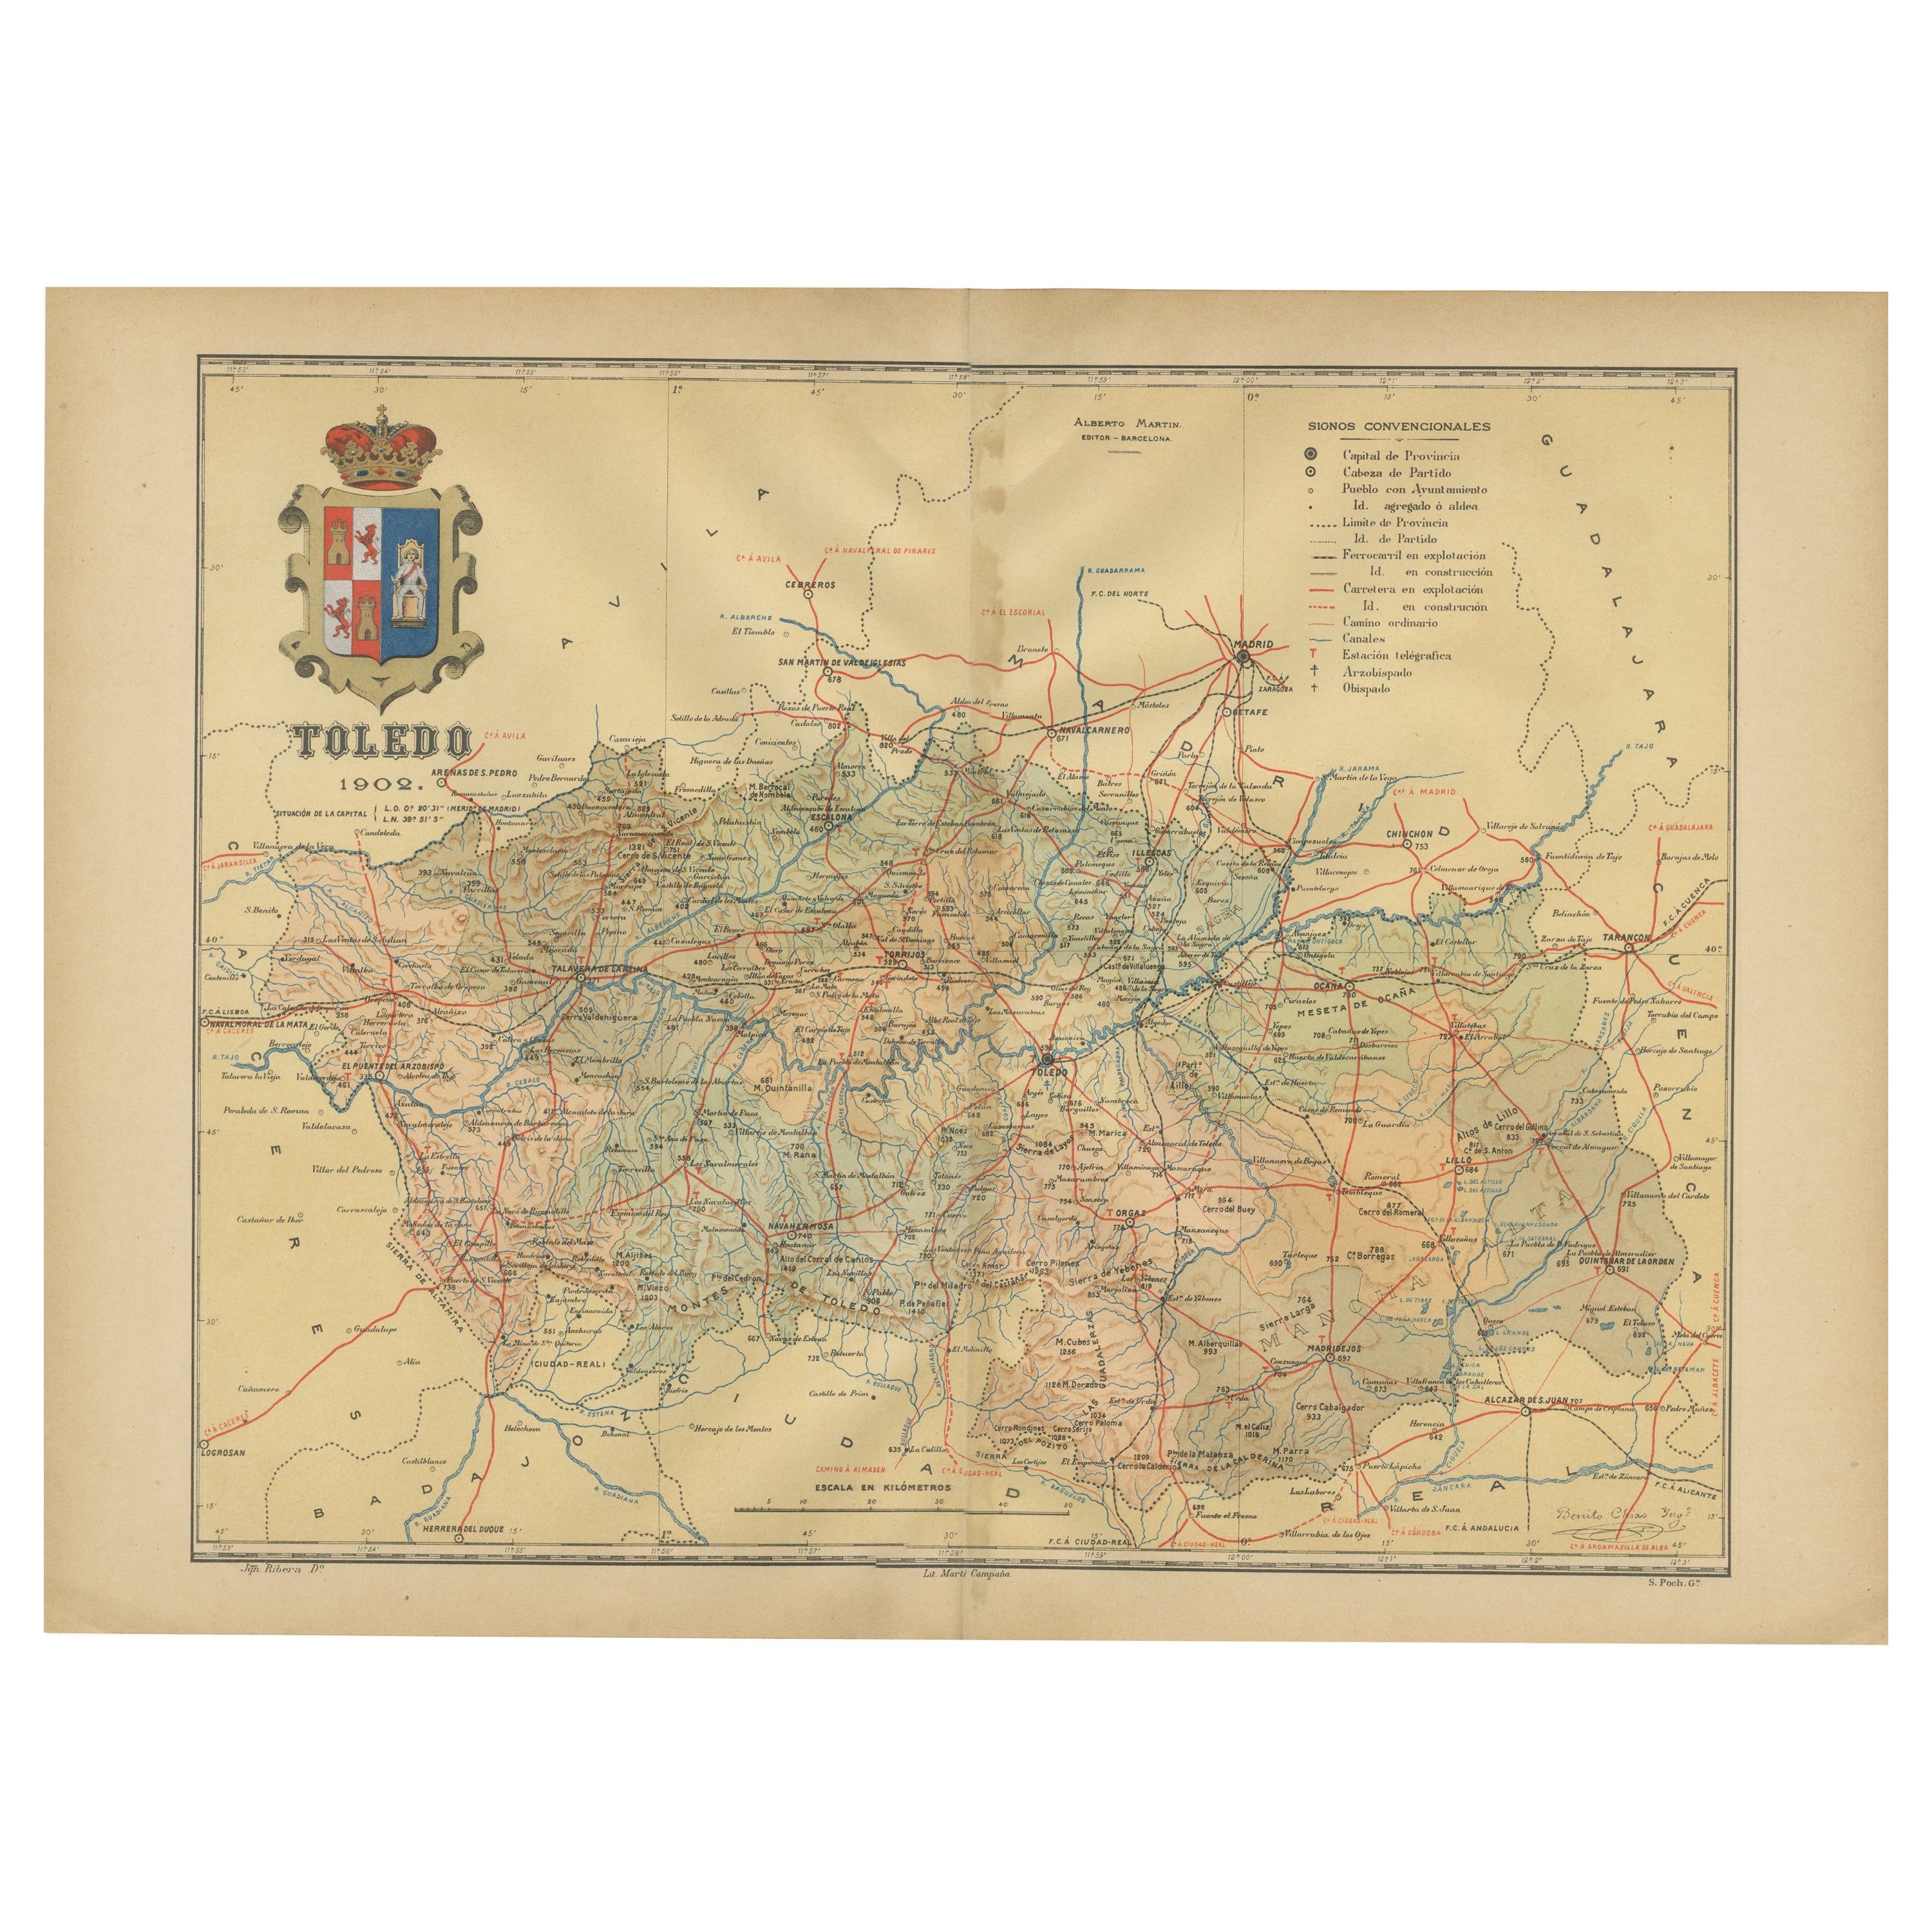 Toledo 1902: A Historical Cartographic Study of this Spanish Province For Sale